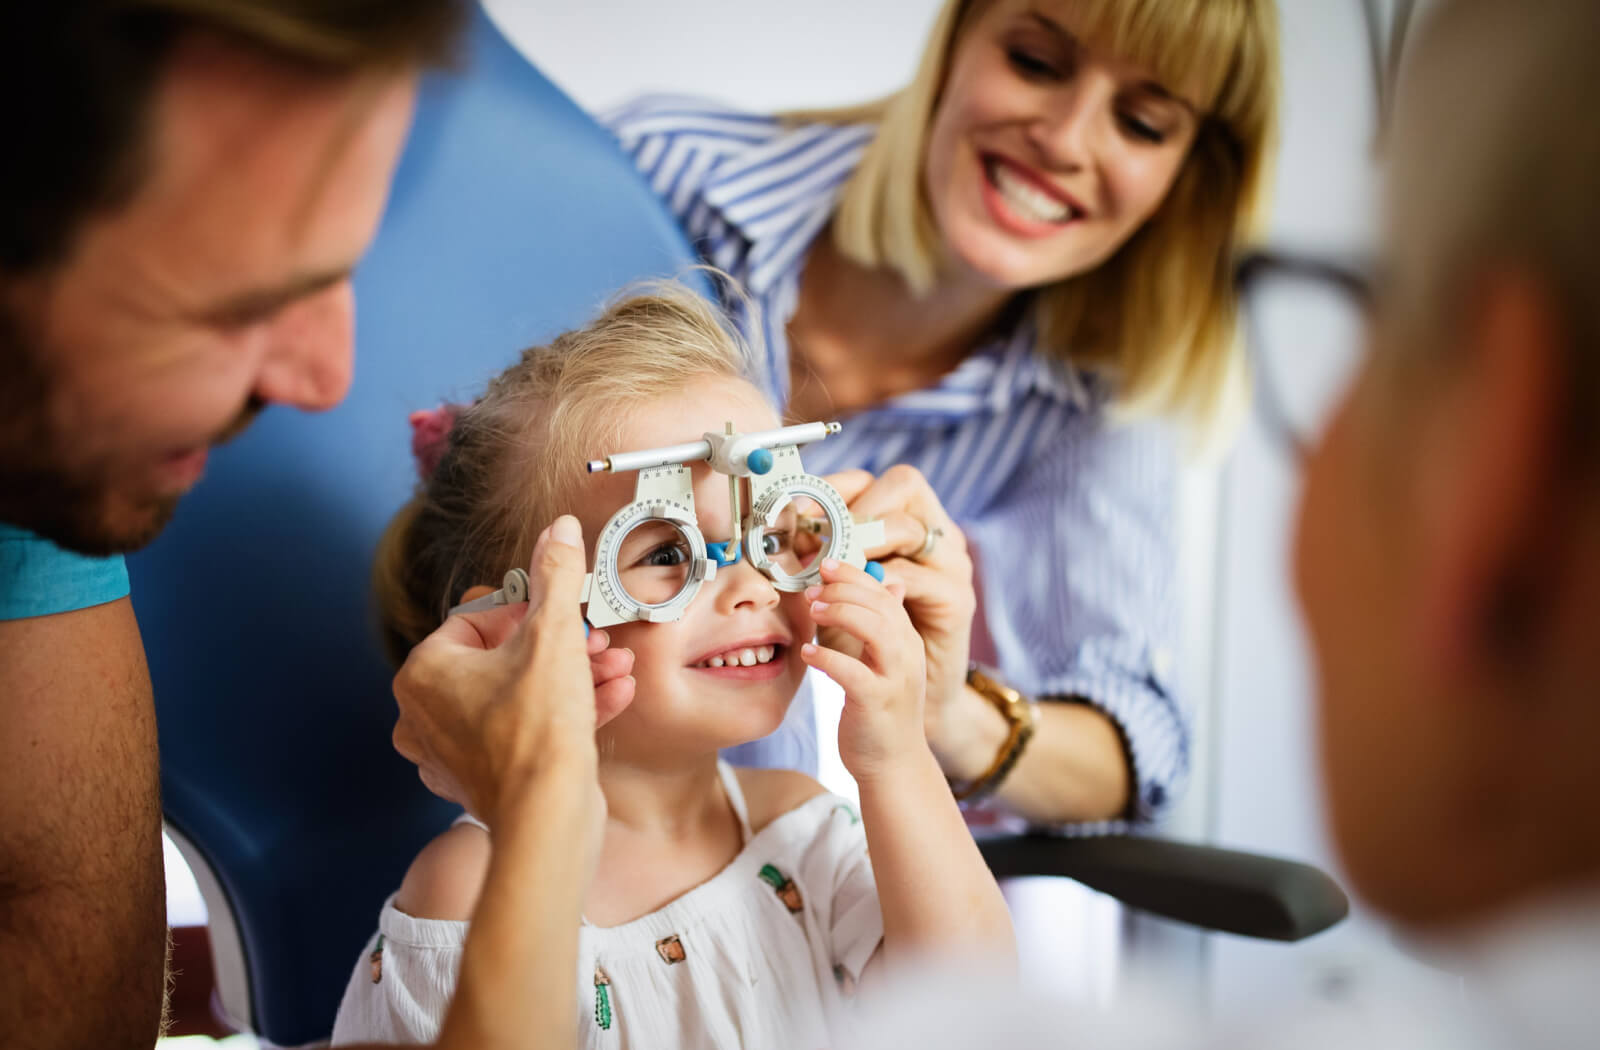 Parents on family eye exam with their daughter